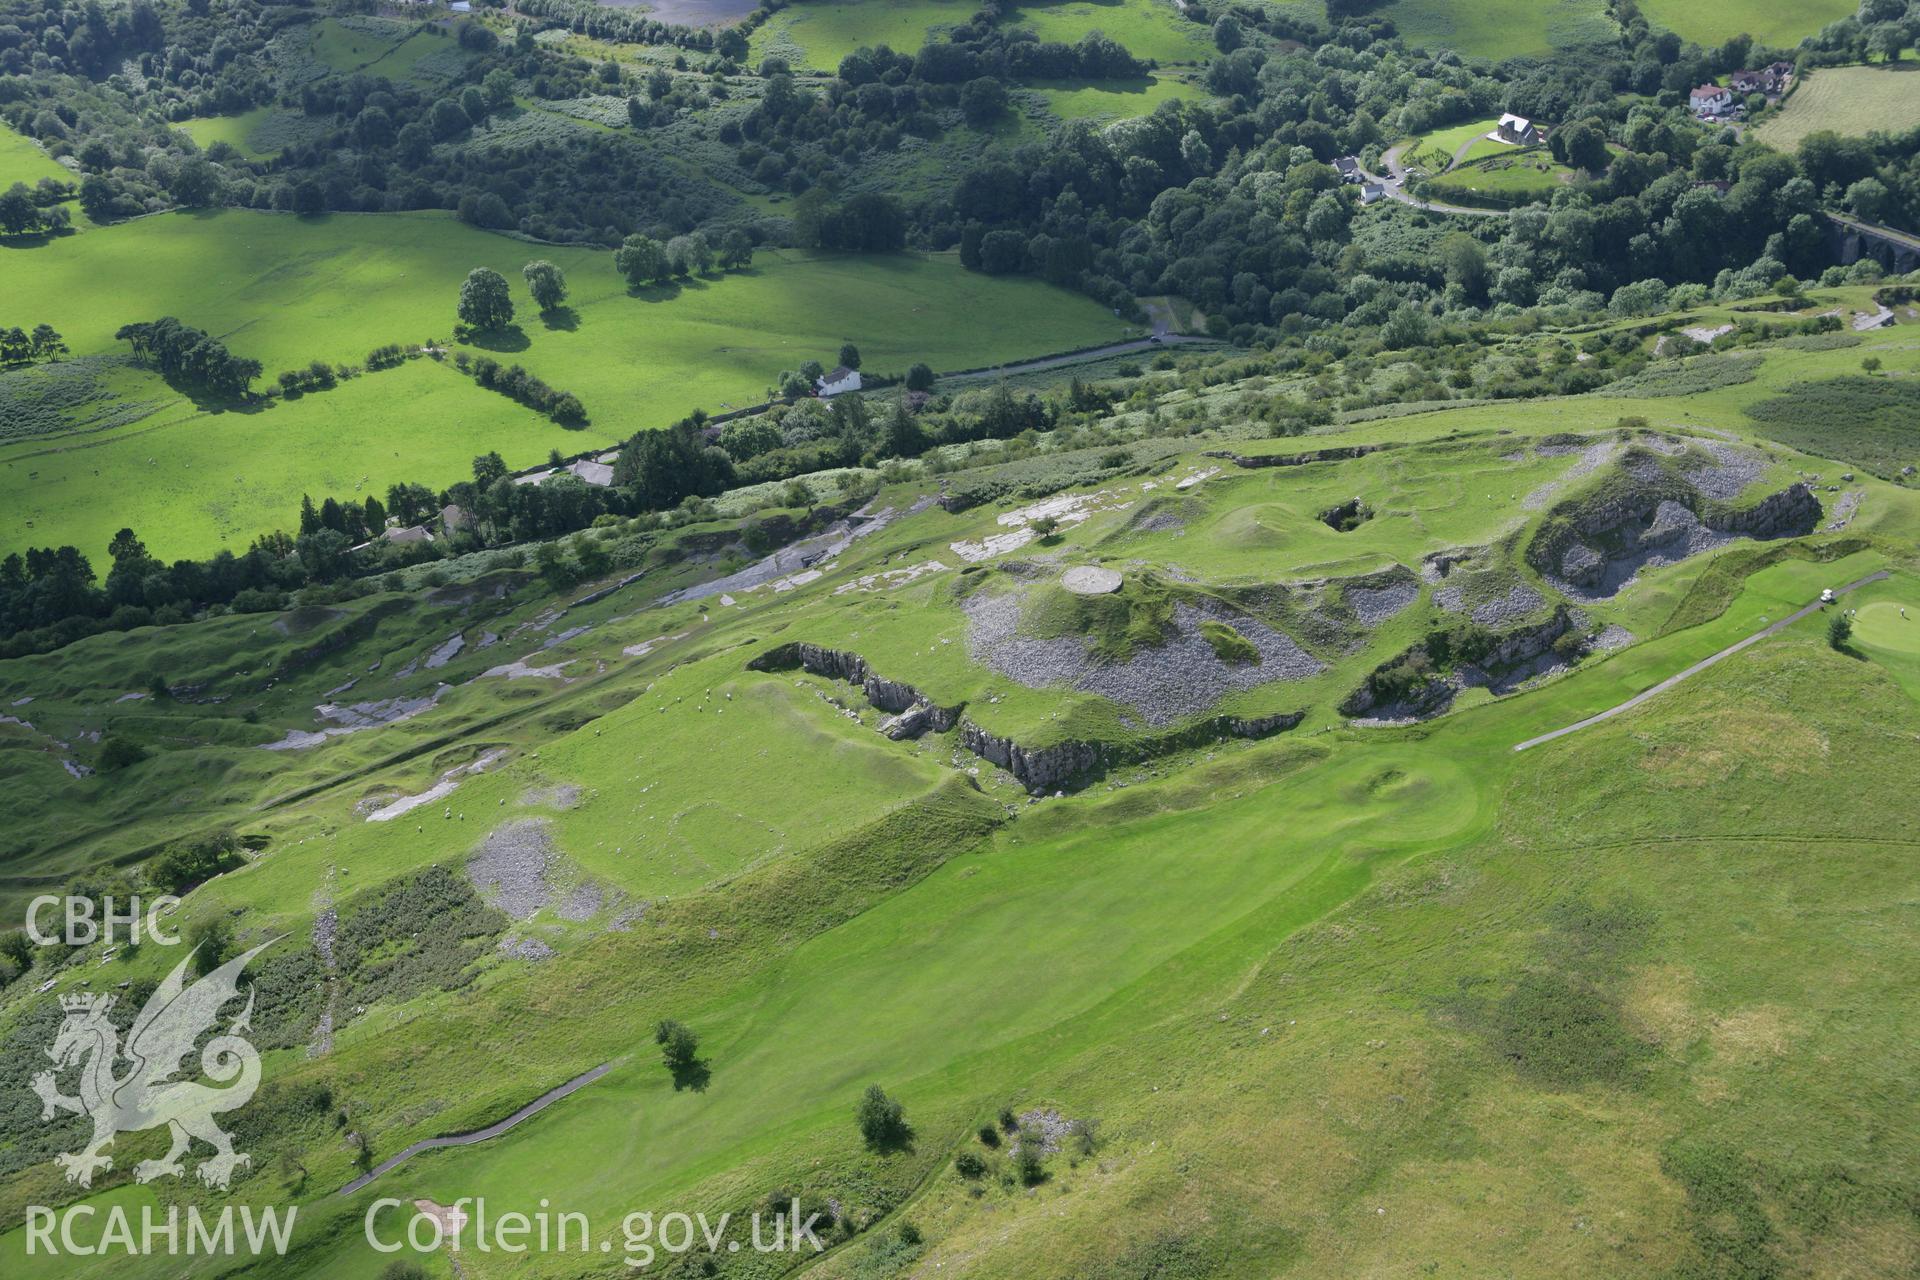 RCAHMW colour oblique aerial photograph of Morlais Castle. Taken on 30 July 2007 by Toby Driver